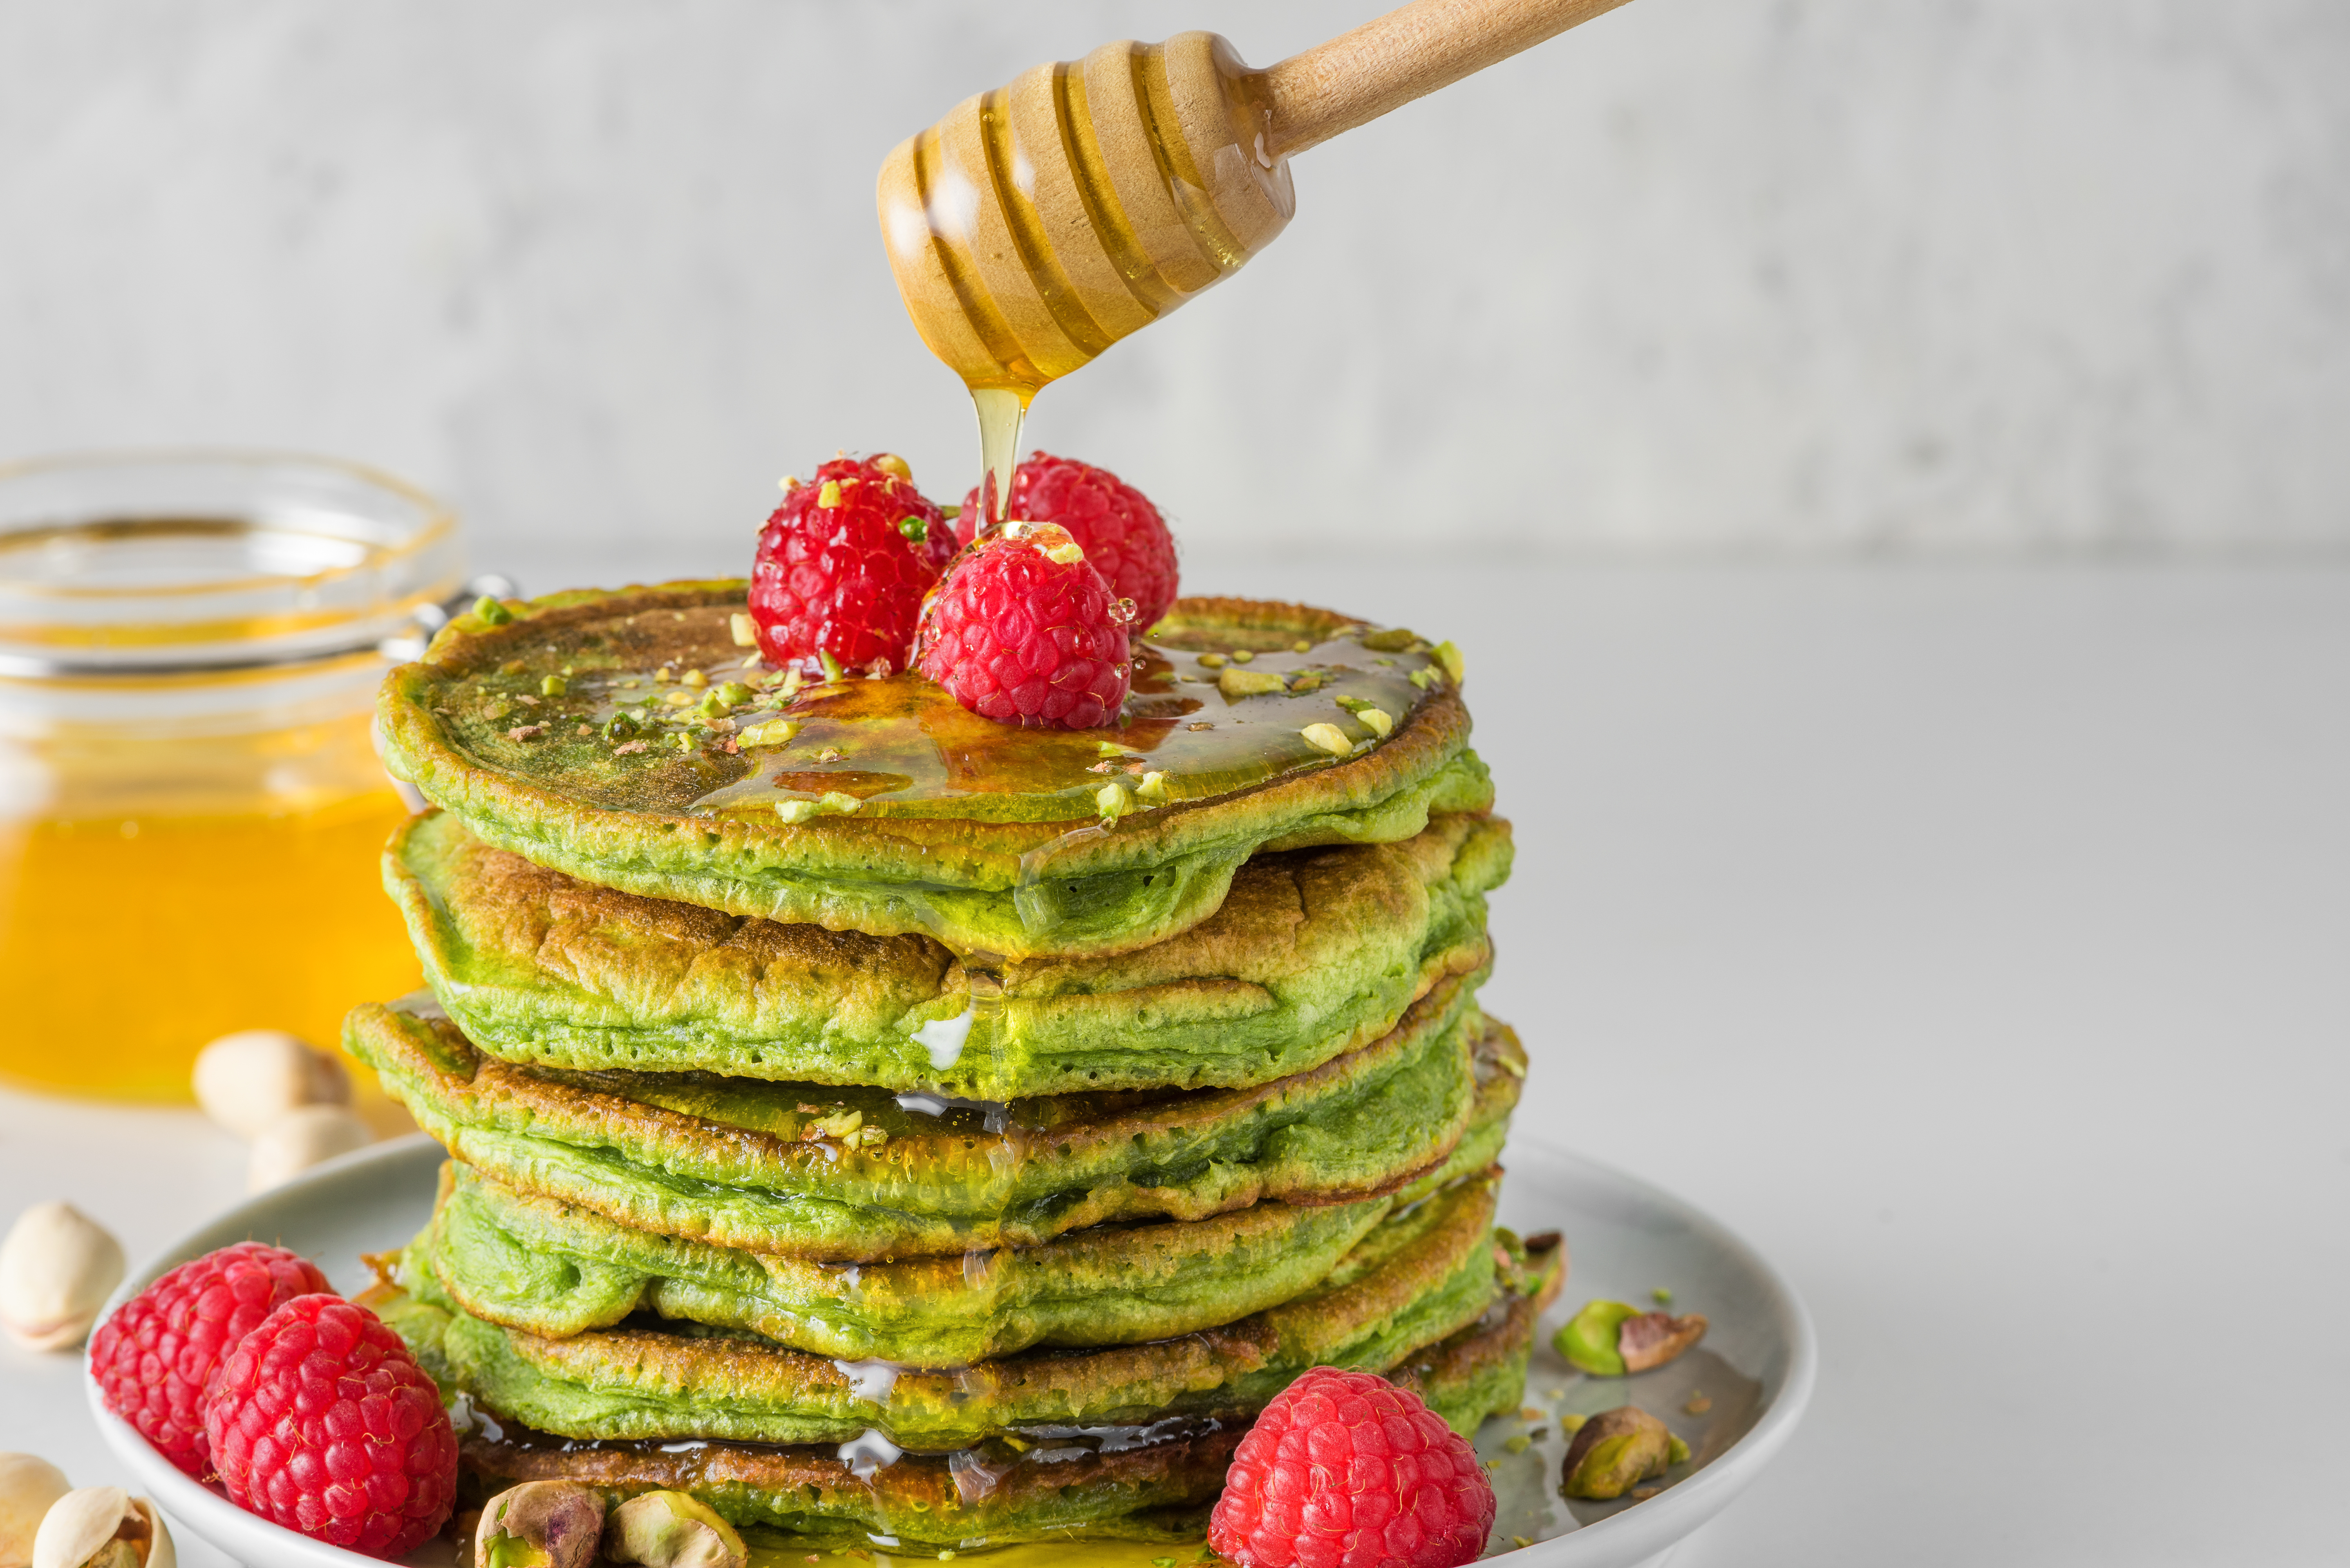 Matcha tea pancakes with fresh raspberries, pistachios and flowing honey.